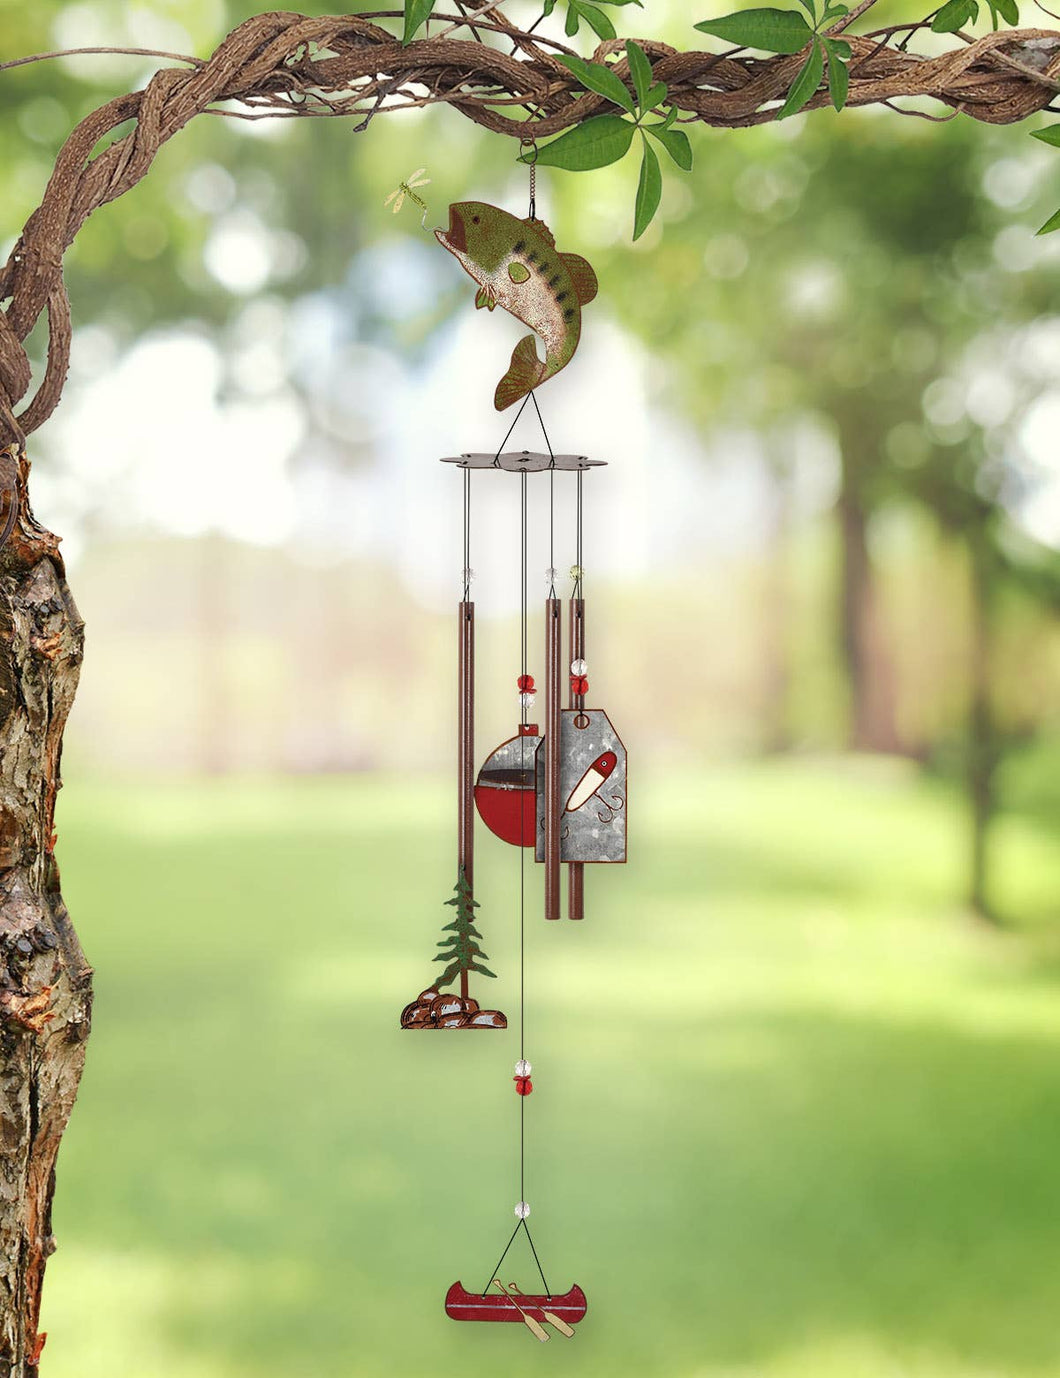 Catch of the Day, Rustic Bass Wind Chime